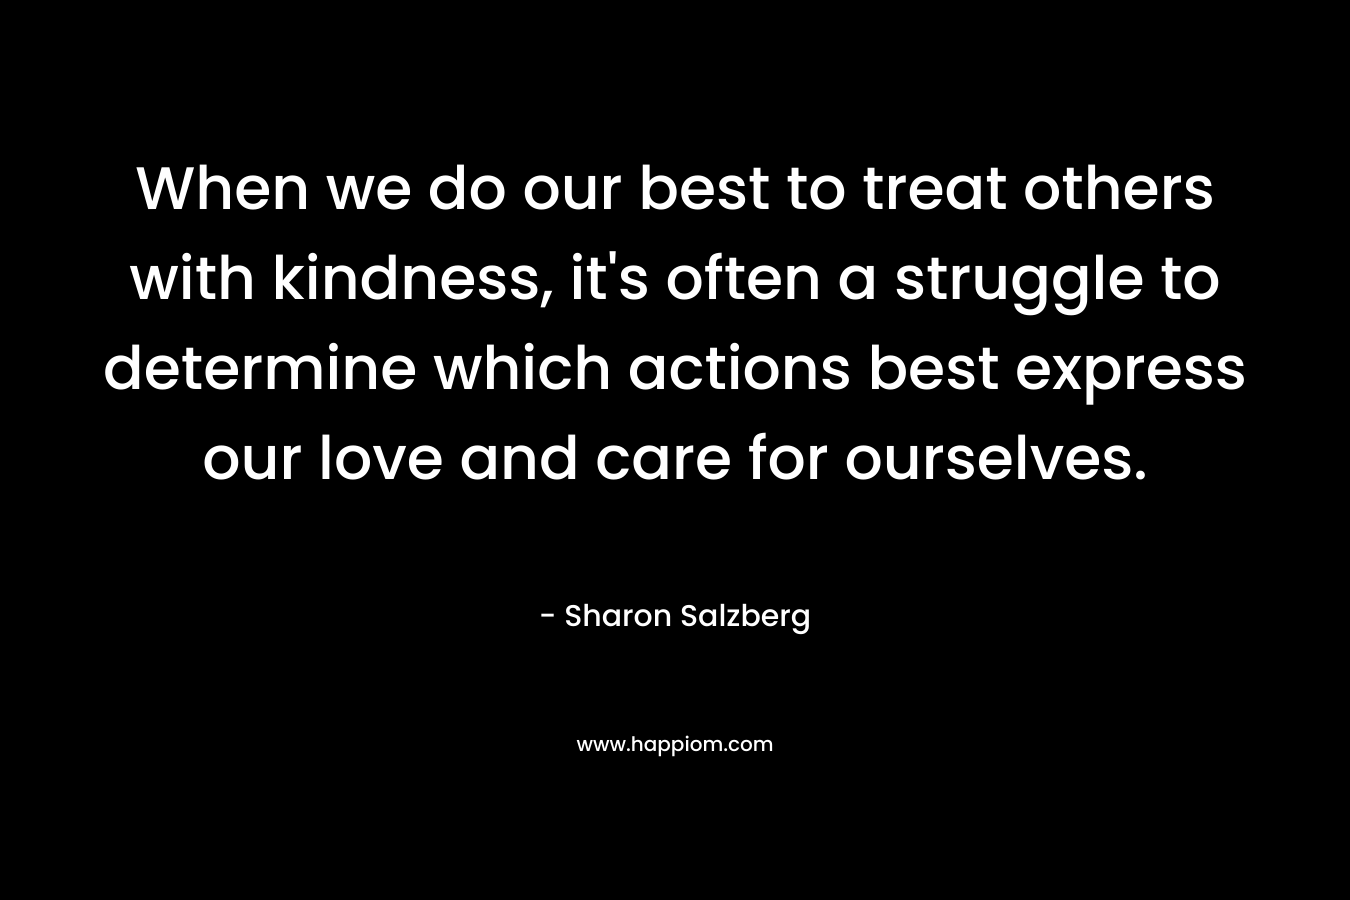 When we do our best to treat others with kindness, it's often a struggle to determine which actions best express our love and care for ourselves.